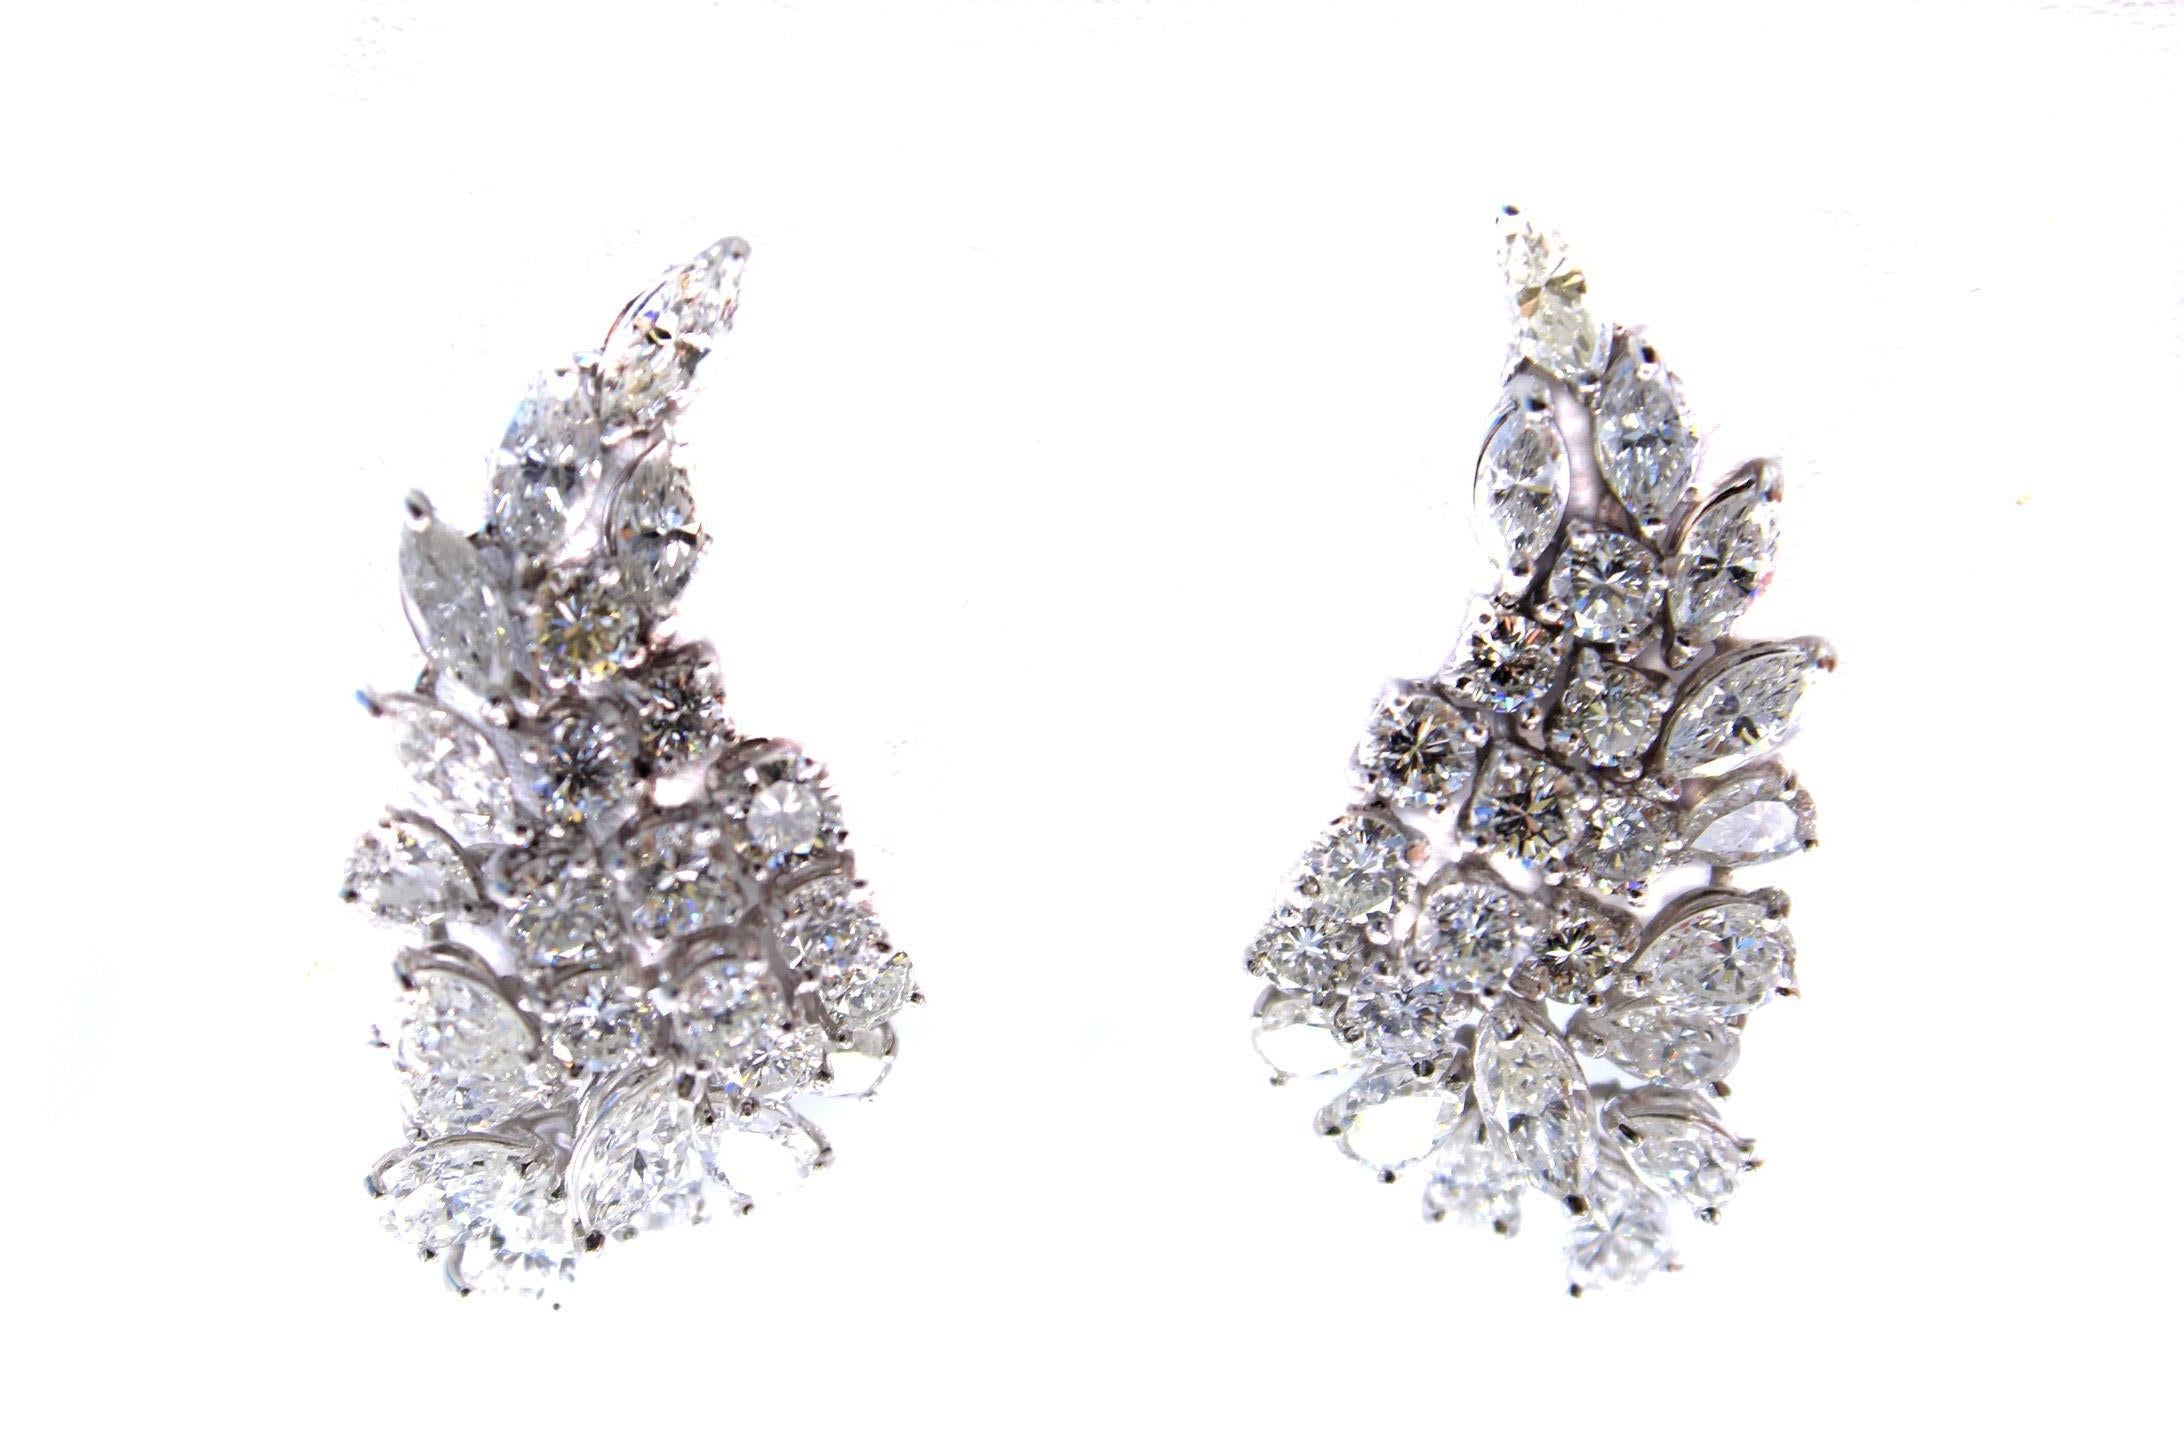 Masterfully hand-crafted in platinum these chic and luxurious diamond cluster earrings are shaped to flow elegantly up the ear. Set with 22 round brilliant cut diamonds, 16 pear shape and 12 marquis shape diamonds the total diamond weight has been